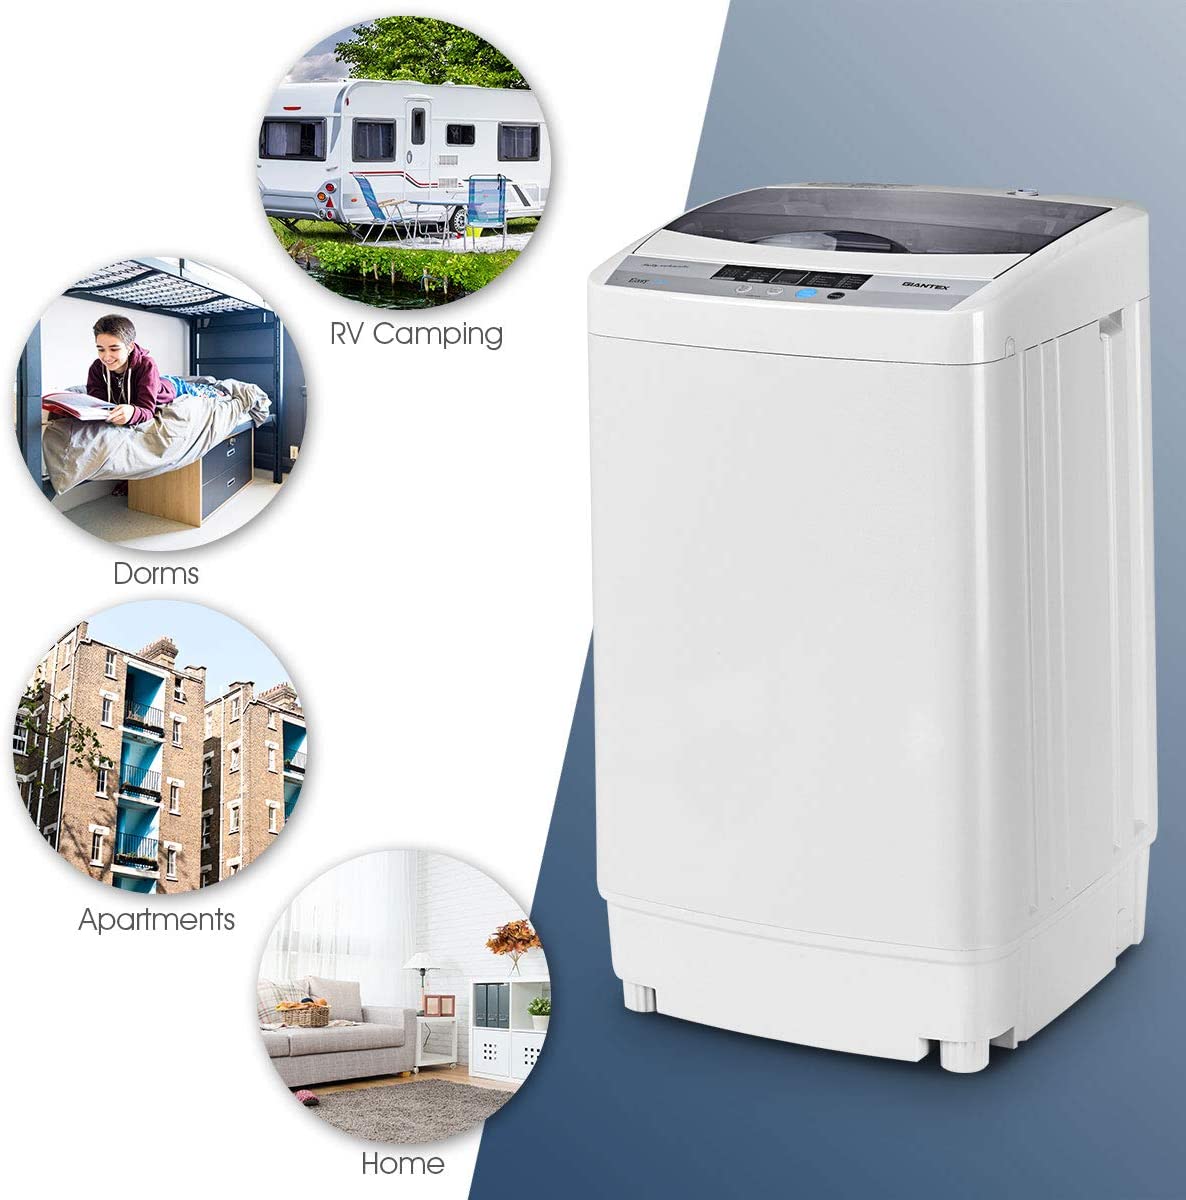 Fully Automatic Washing Machines & Portable Washer Dryer Combos